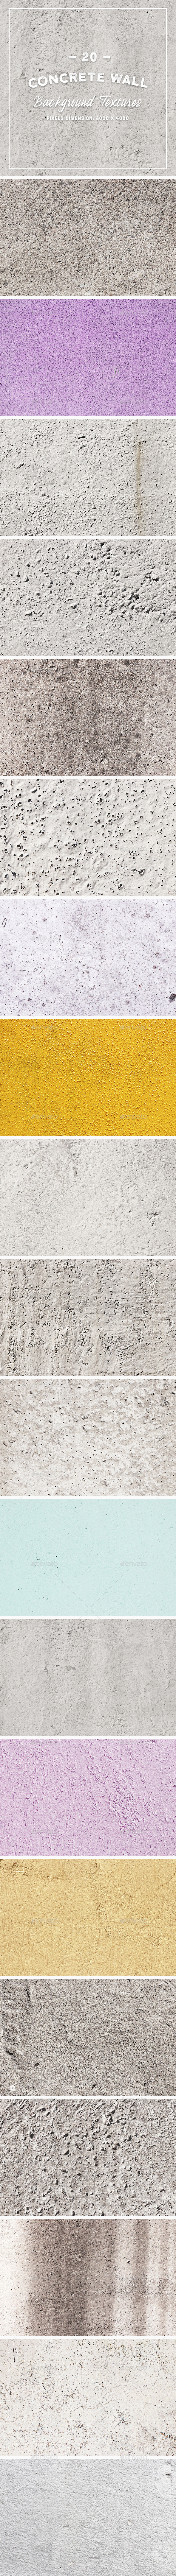 20 Concrete Wall Background Textures by webcombo | GraphicRiver